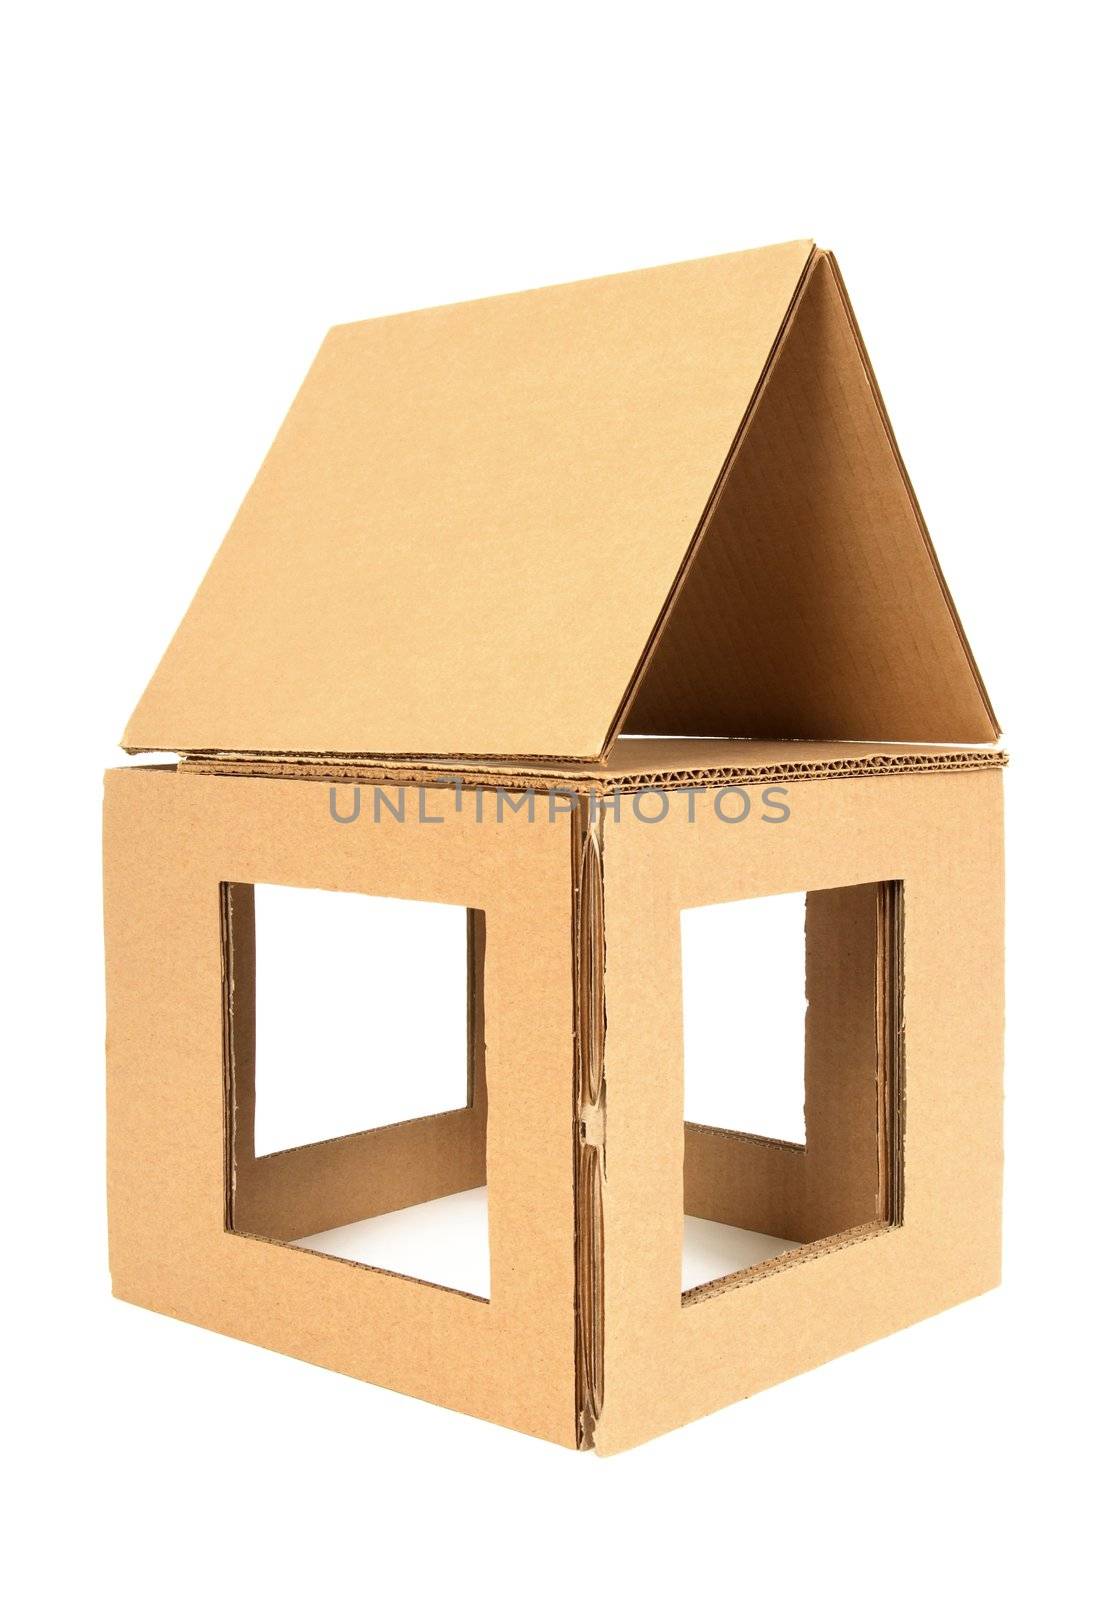 House made of used cardboard, on white background.